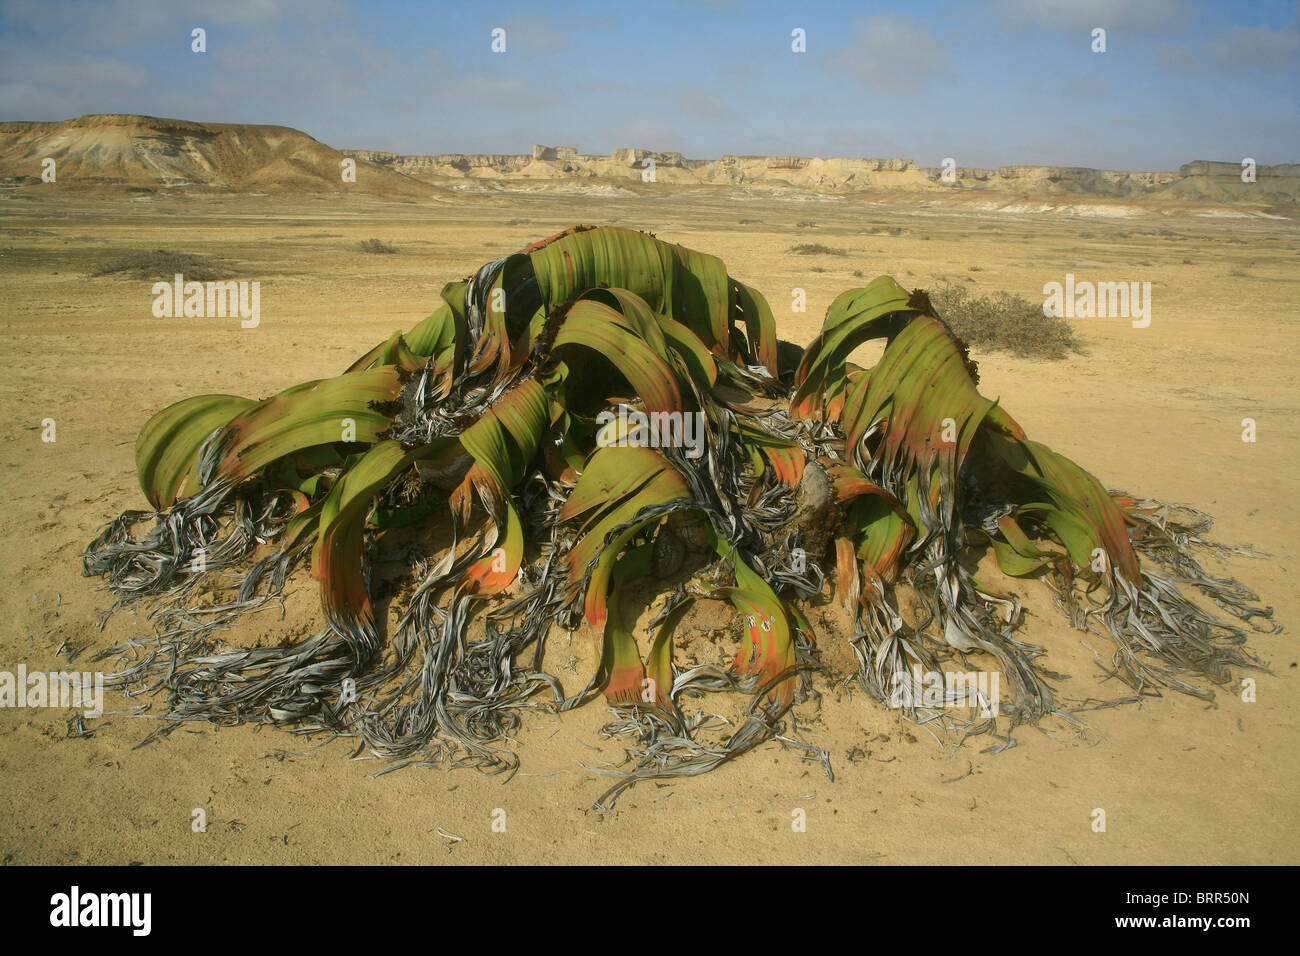 Welwitschia mirabilis plant, one of the world longest living plants that live to 1500 years. Stock Photo